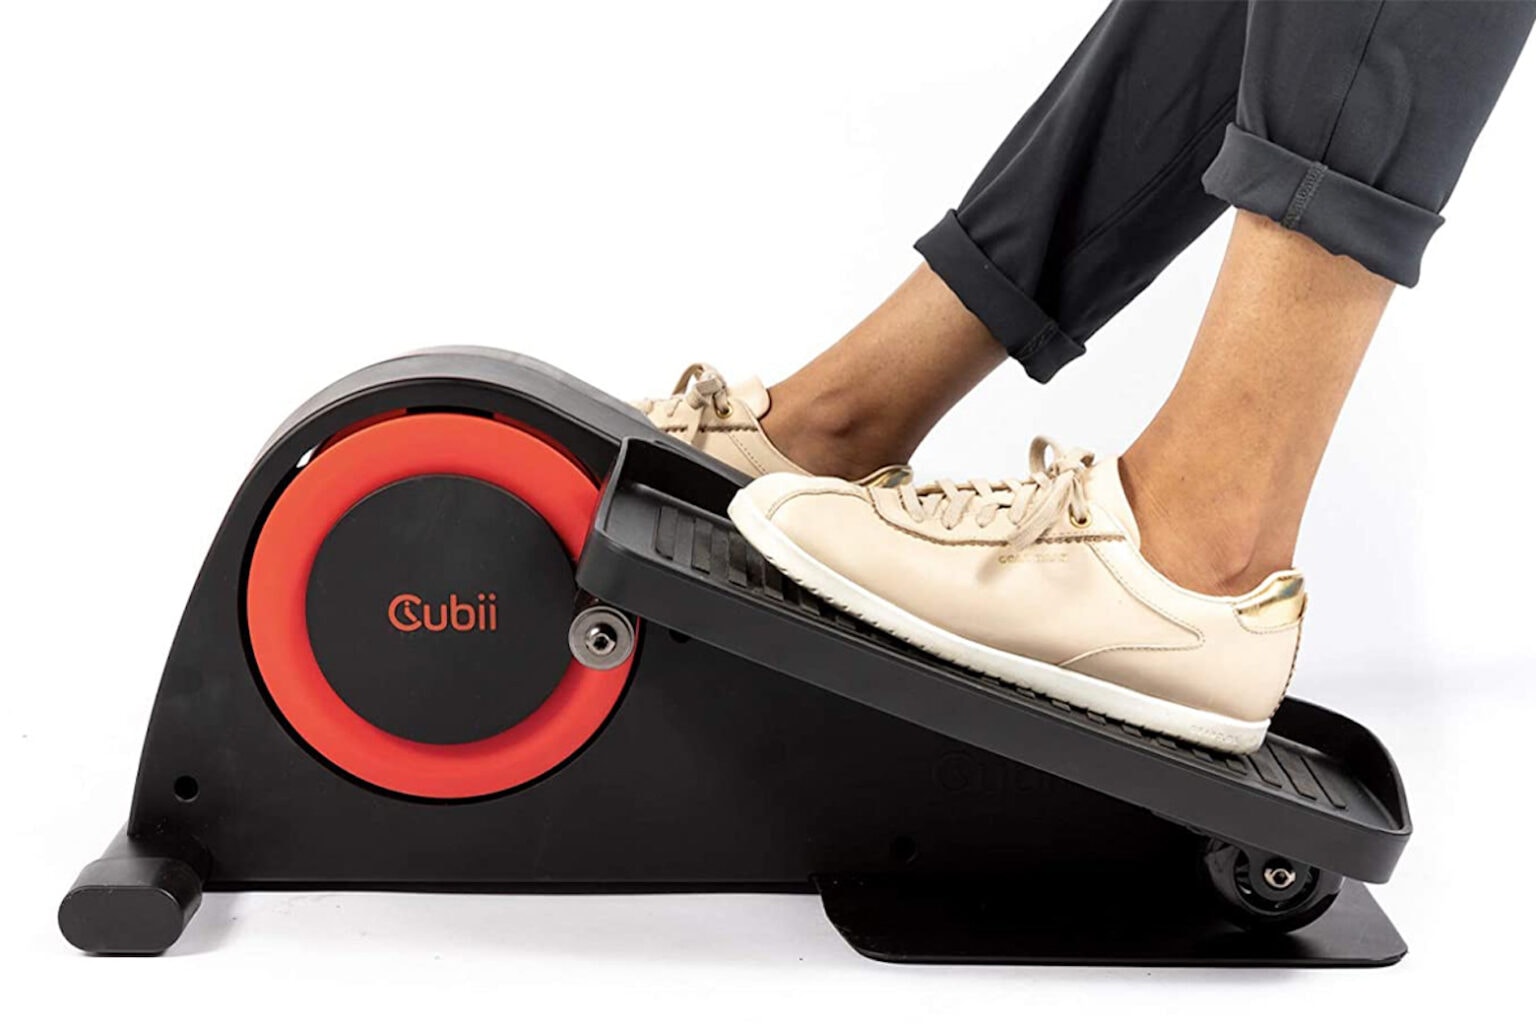 Work out at work with this under-desk elliptical on sale.